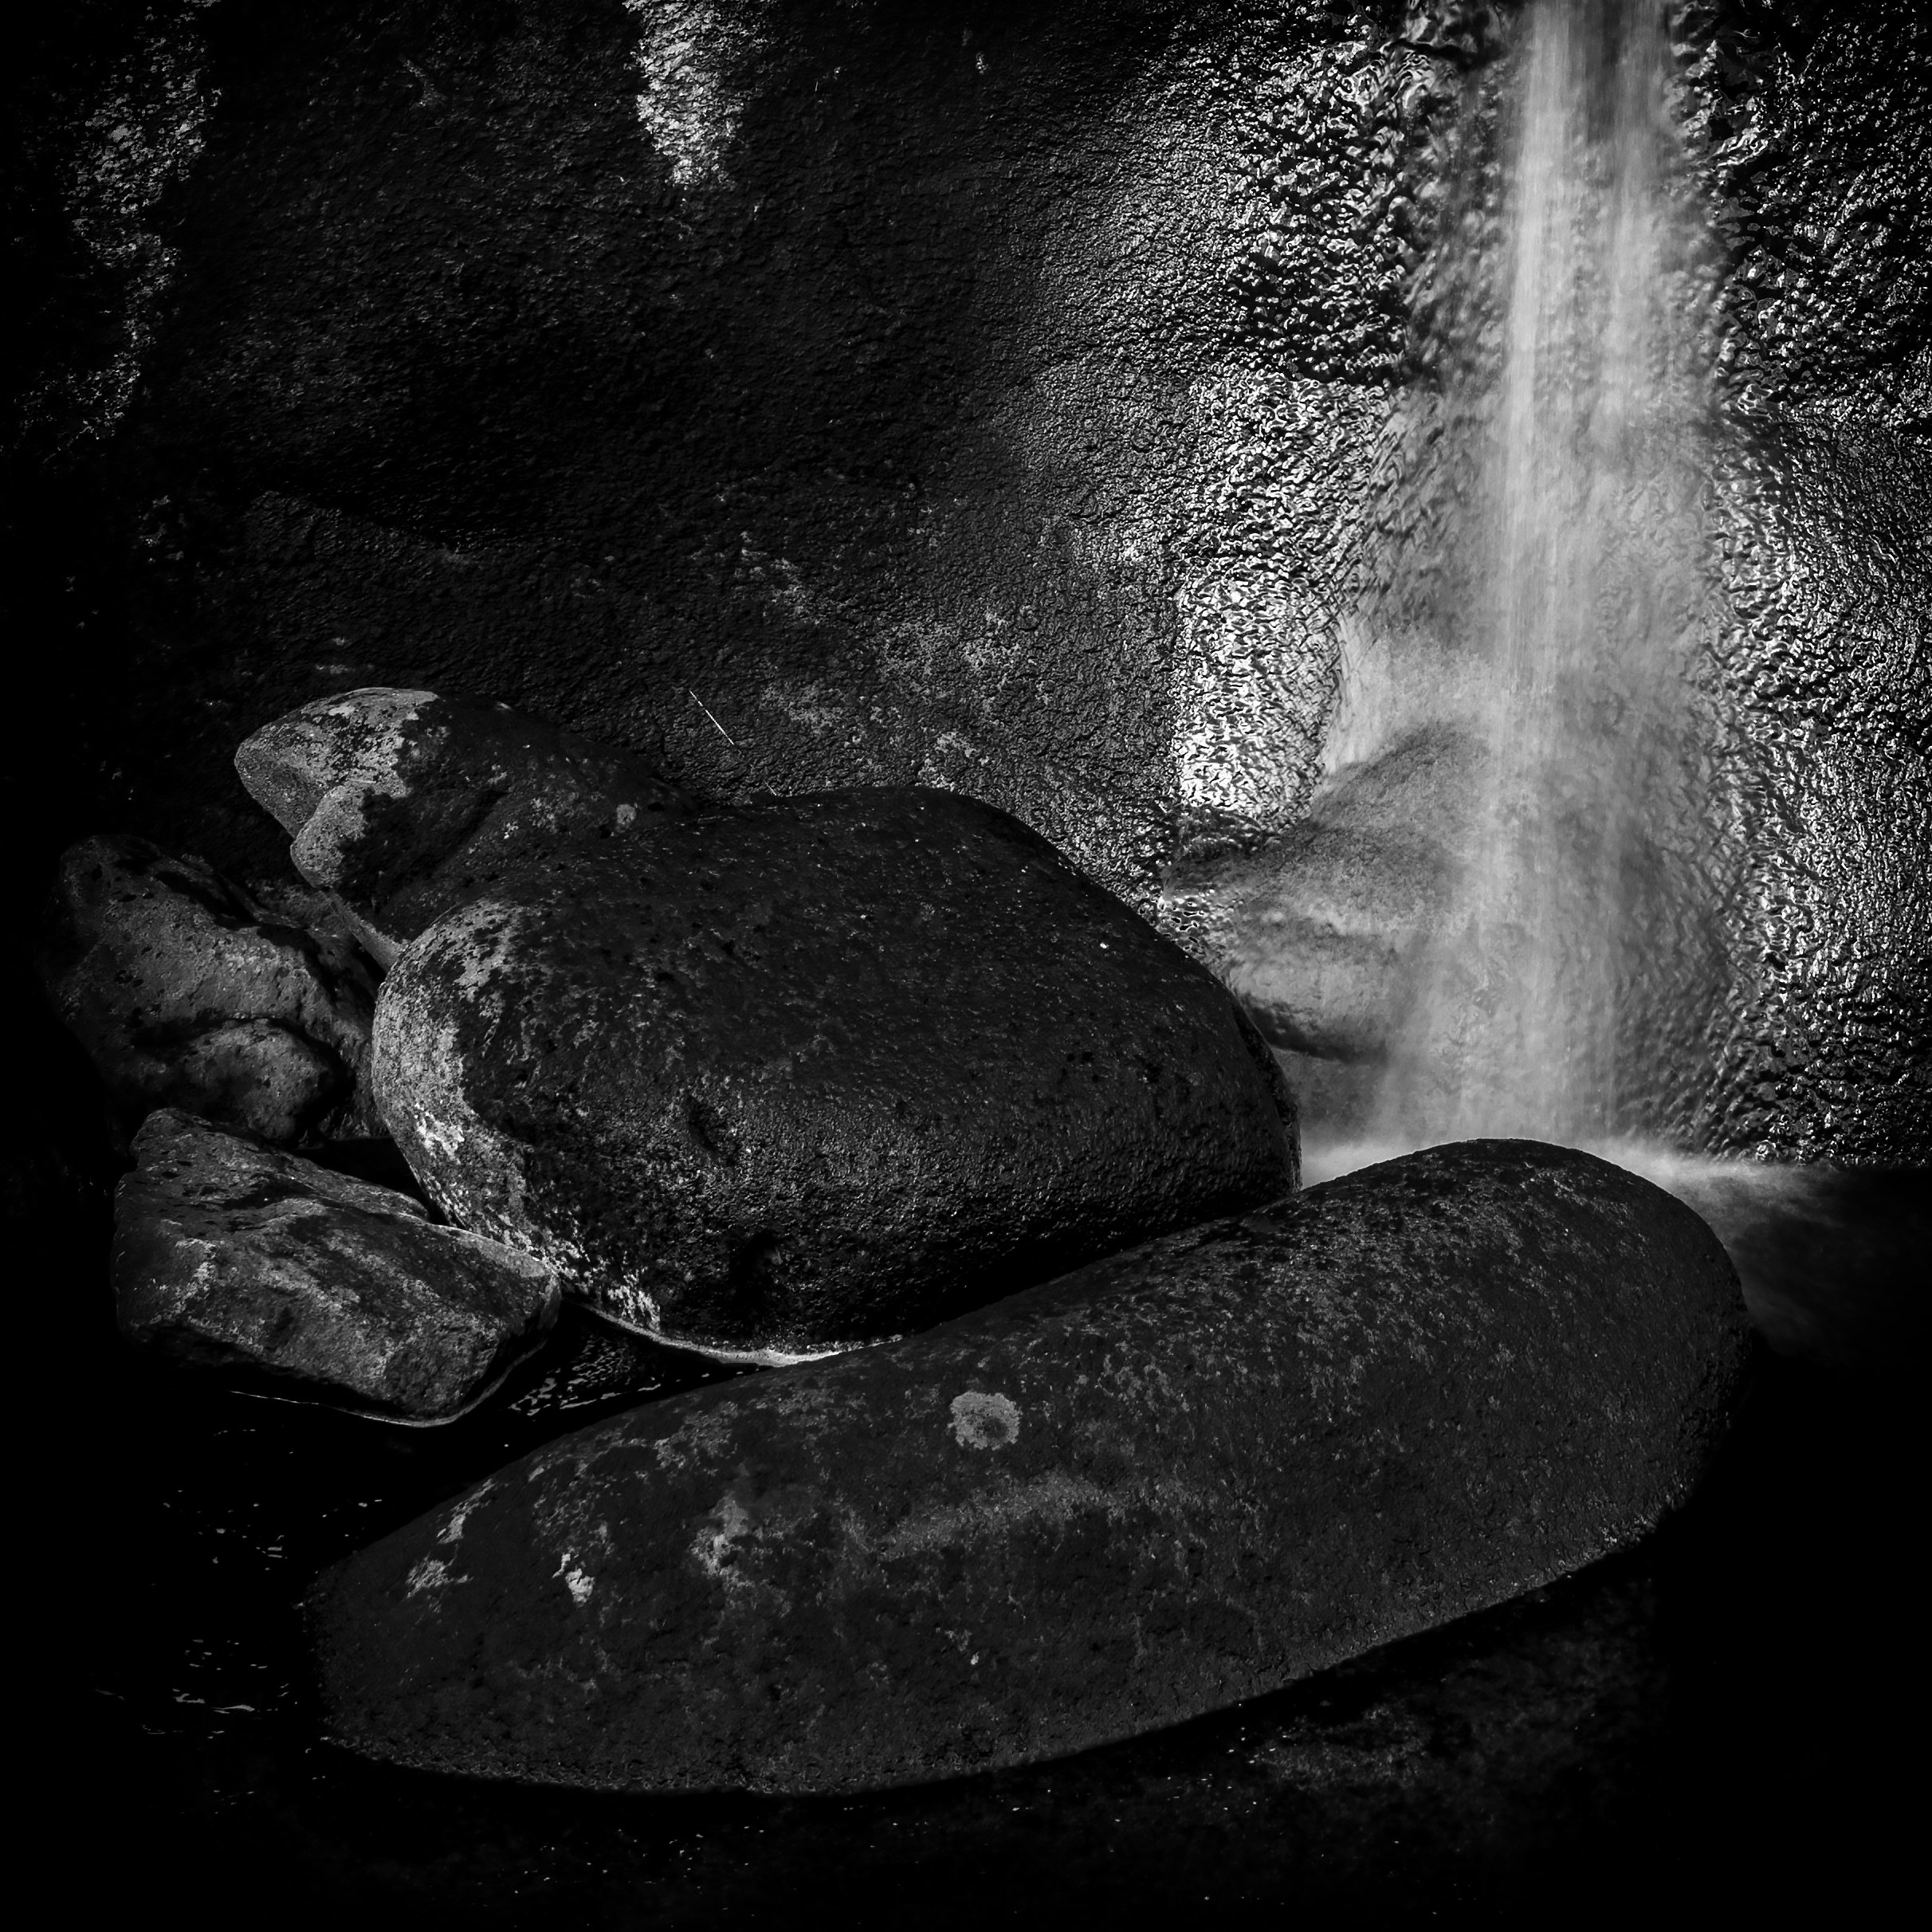 Mysterious and dark part of the Glen Etive waterfall, Scotland